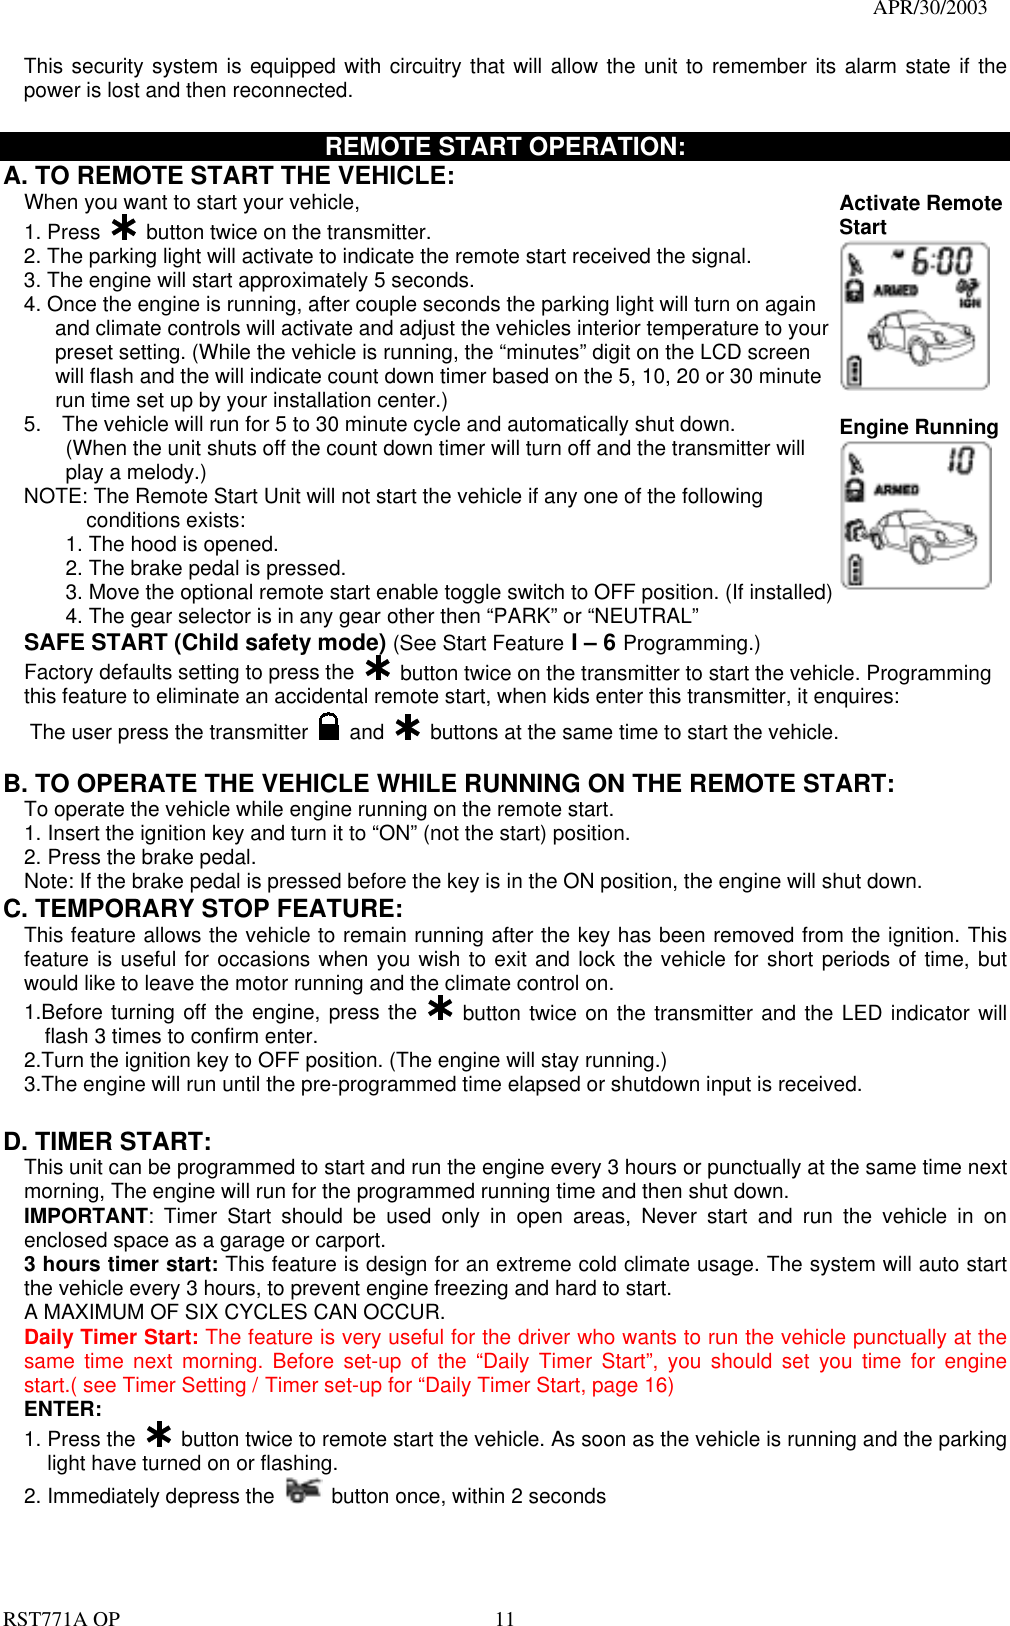                                                                                   APR/30/2003  RST771A OP    11 This security system is equipped with circuitry that will allow the unit to remember its alarm state if the power is lost and then reconnected.    REMOTE START OPERATION: A. TO REMOTE START THE VEHICLE: When you want to start your vehicle,   1. Press   button twice on the transmitter. 2. The parking light will activate to indicate the remote start received the signal. 3. The engine will start approximately 5 seconds. 4. Once the engine is running, after couple seconds the parking light will turn on again         and climate controls will activate and adjust the vehicles interior temperature to your       preset setting. (While the vehicle is running, the “minutes” digit on the LCD screen     will flash and the will indicate count down timer based on the 5, 10, 20 or 30 minute     run time set up by your installation center.) 5.    The vehicle will run for 5 to 30 minute cycle and automatically shut down. (When the unit shuts off the count down timer will turn off and the transmitter will   play a melody.) NOTE: The Remote Start Unit will not start the vehicle if any one of the following conditions exists: 1. The hood is opened. 2. The brake pedal is pressed. 3. Move the optional remote start enable toggle switch to OFF position. (If installed) 4. The gear selector is in any gear other then “PARK” or “NEUTRAL” Activate Remote Start    Engine Running  SAFE START (Child safety mode) (See Start Feature I – 6 Programming.) Factory defaults setting to press the    button twice on the transmitter to start the vehicle. Programming this feature to eliminate an accidental remote start, when kids enter this transmitter, it enquires: The user press the transmitter   and    buttons at the same time to start the vehicle.    B. TO OPERATE THE VEHICLE WHILE RUNNING ON THE REMOTE START: To operate the vehicle while engine running on the remote start. 1. Insert the ignition key and turn it to “ON” (not the start) position. 2. Press the brake pedal. Note: If the brake pedal is pressed before the key is in the ON position, the engine will shut down. C. TEMPORARY STOP FEATURE: This feature allows the vehicle to remain running after the key has been removed from the ignition. This feature is useful for occasions when you wish to exit and lock the vehicle for short periods of time, but would like to leave the motor running and the climate control on. 1.Before turning off the engine, press the   button twice on the transmitter and the LED indicator will flash 3 times to confirm enter. 2.Turn the ignition key to OFF position. (The engine will stay running.) 3.The engine will run until the pre-programmed time elapsed or shutdown input is received.  D. TIMER START:   This unit can be programmed to start and run the engine every 3 hours or punctually at the same time next morning, The engine will run for the programmed running time and then shut down. IMPORTANT: Timer Start should be used only in open areas, Never start and run the vehicle in on enclosed space as a garage or carport. 3 hours timer start: This feature is design for an extreme cold climate usage. The system will auto start the vehicle every 3 hours, to prevent engine freezing and hard to start. A MAXIMUM OF SIX CYCLES CAN OCCUR.   Daily Timer Start: The feature is very useful for the driver who wants to run the vehicle punctually at the same time next morning. Before set-up of the “Daily Timer Start”, you should set you time for engine start.( see Timer Setting / Timer set-up for “Daily Timer Start, page 16) ENTER: 1. Press the   button twice to remote start the vehicle. As soon as the vehicle is running and the parking light have turned on or flashing. 2. Immediately depress the    button once, within 2 seconds 